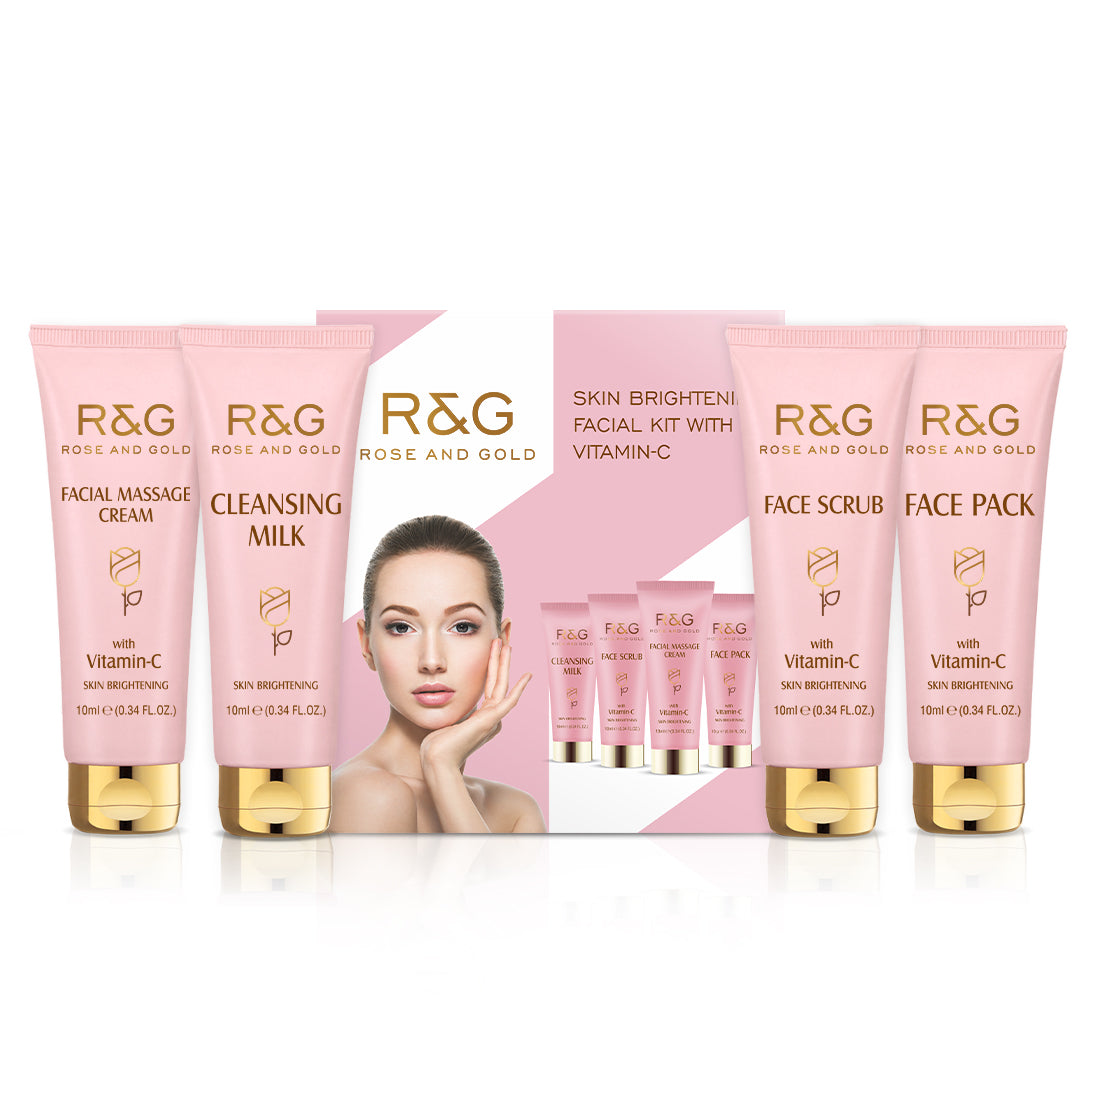 R&G Skin Brightening Mini Facial Kit For Gold Like Glow - Cleansing Milk, Face Scrub, Facial Massaging Cream, Face Pack - 4 Easy Steps For Bright and Radiant Skin